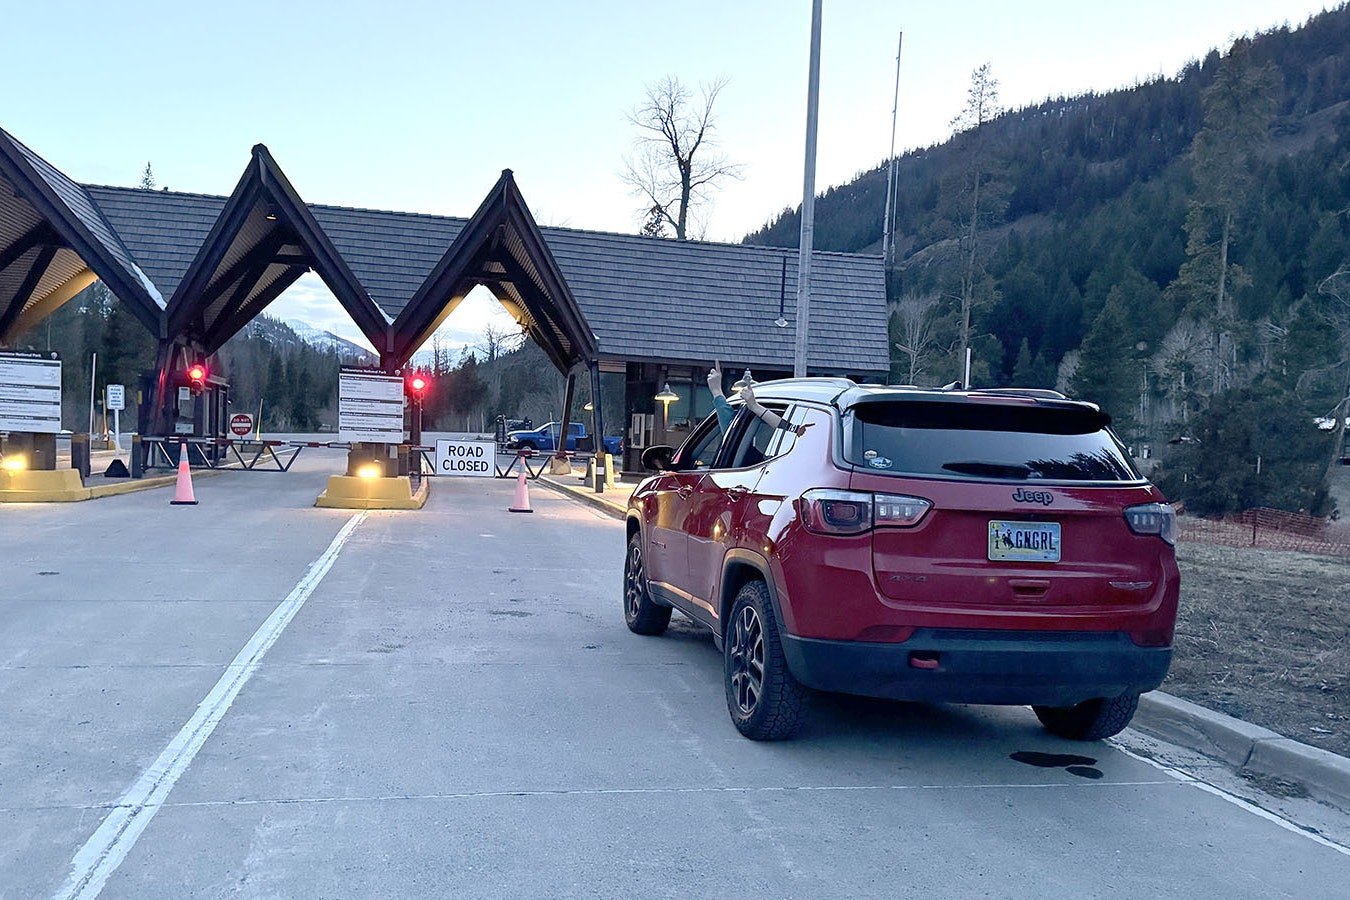 Stacy Boisseau's Jeep Compass just outside the East Entrance of Yellowstone the night before its May 3 opening, first in line for the sixth straight year.